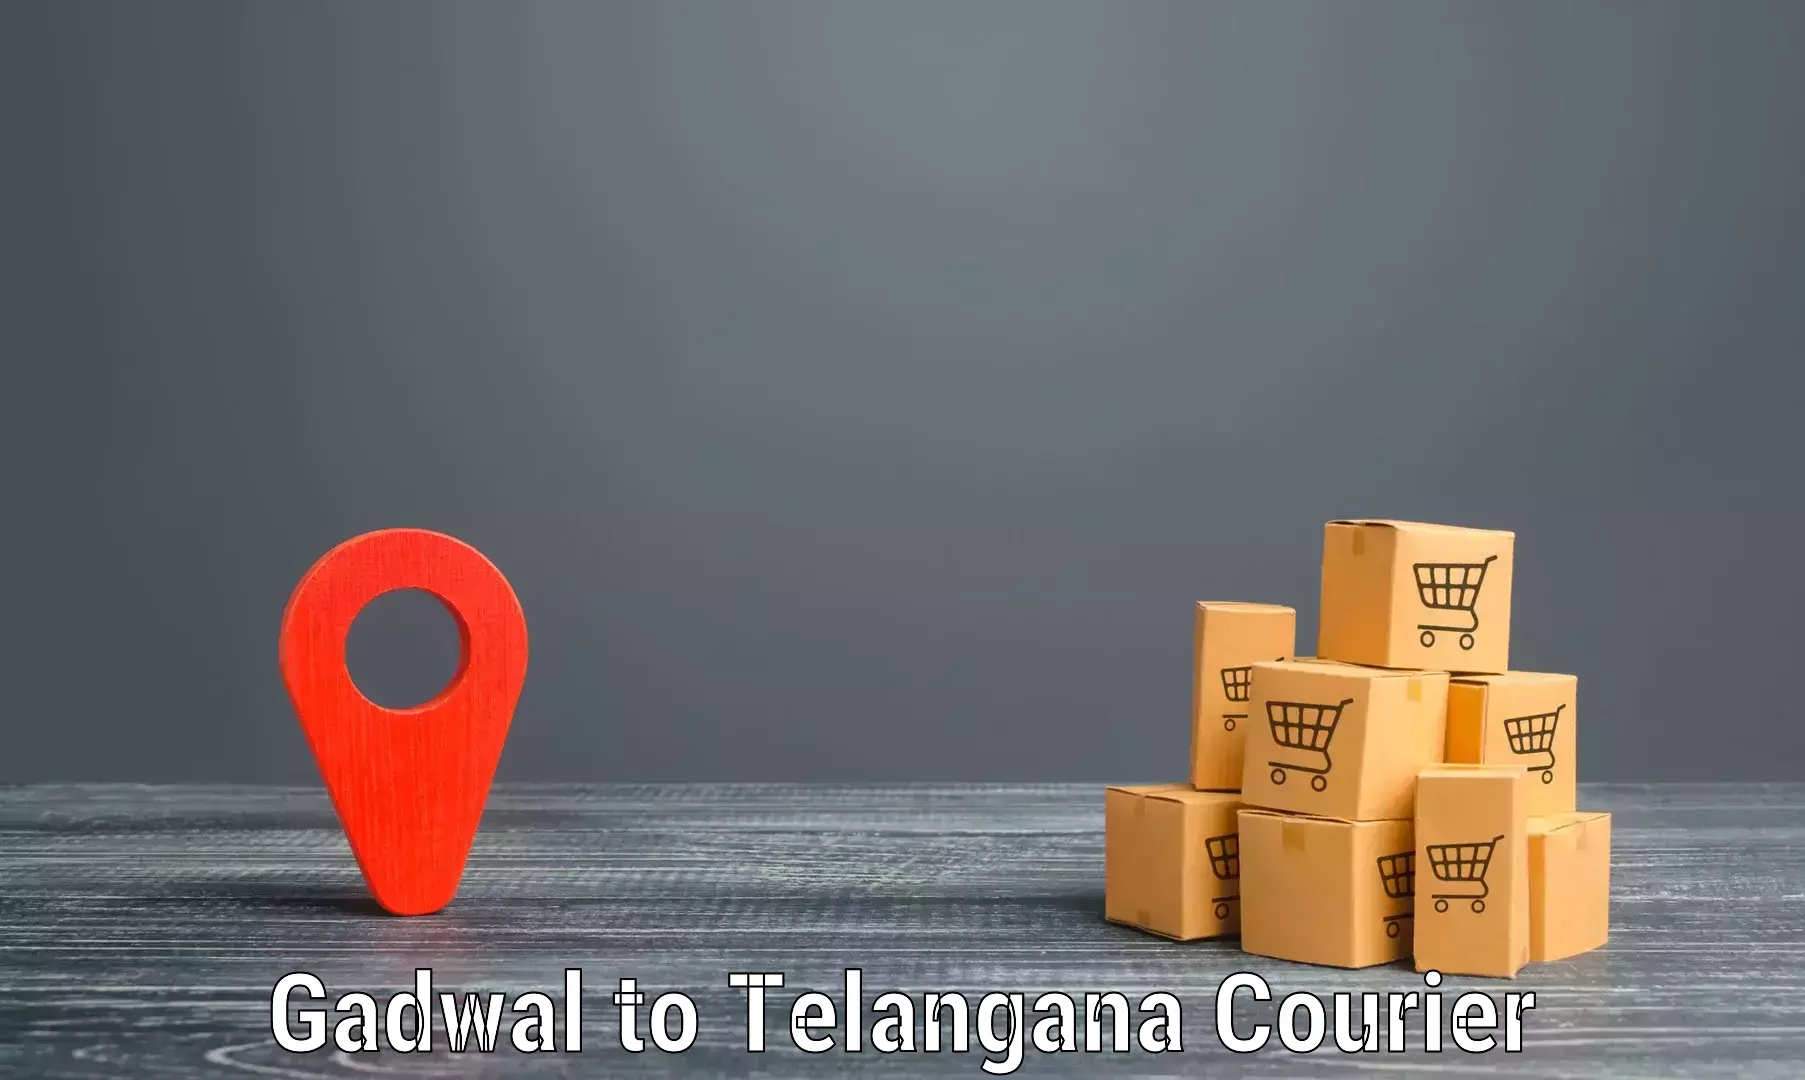 Parcel service for businesses Gadwal to Hyderabad